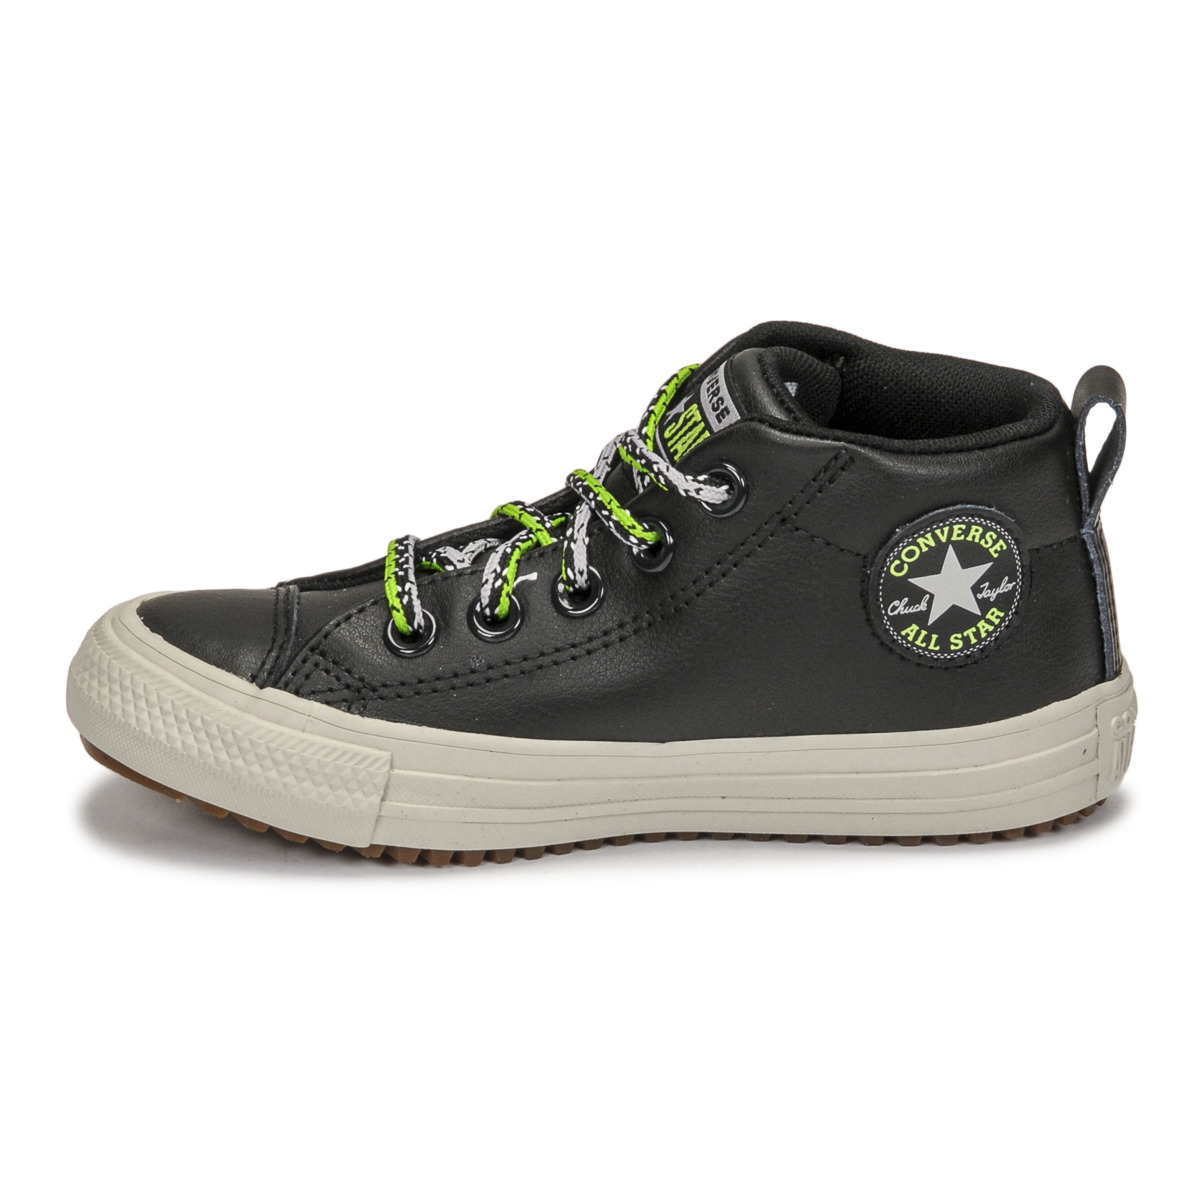 Converse Noir CHUCK TAYLOR ALL STAR STREET BOOT DOUBLE LACE LEATHER MID ypcf86Wn